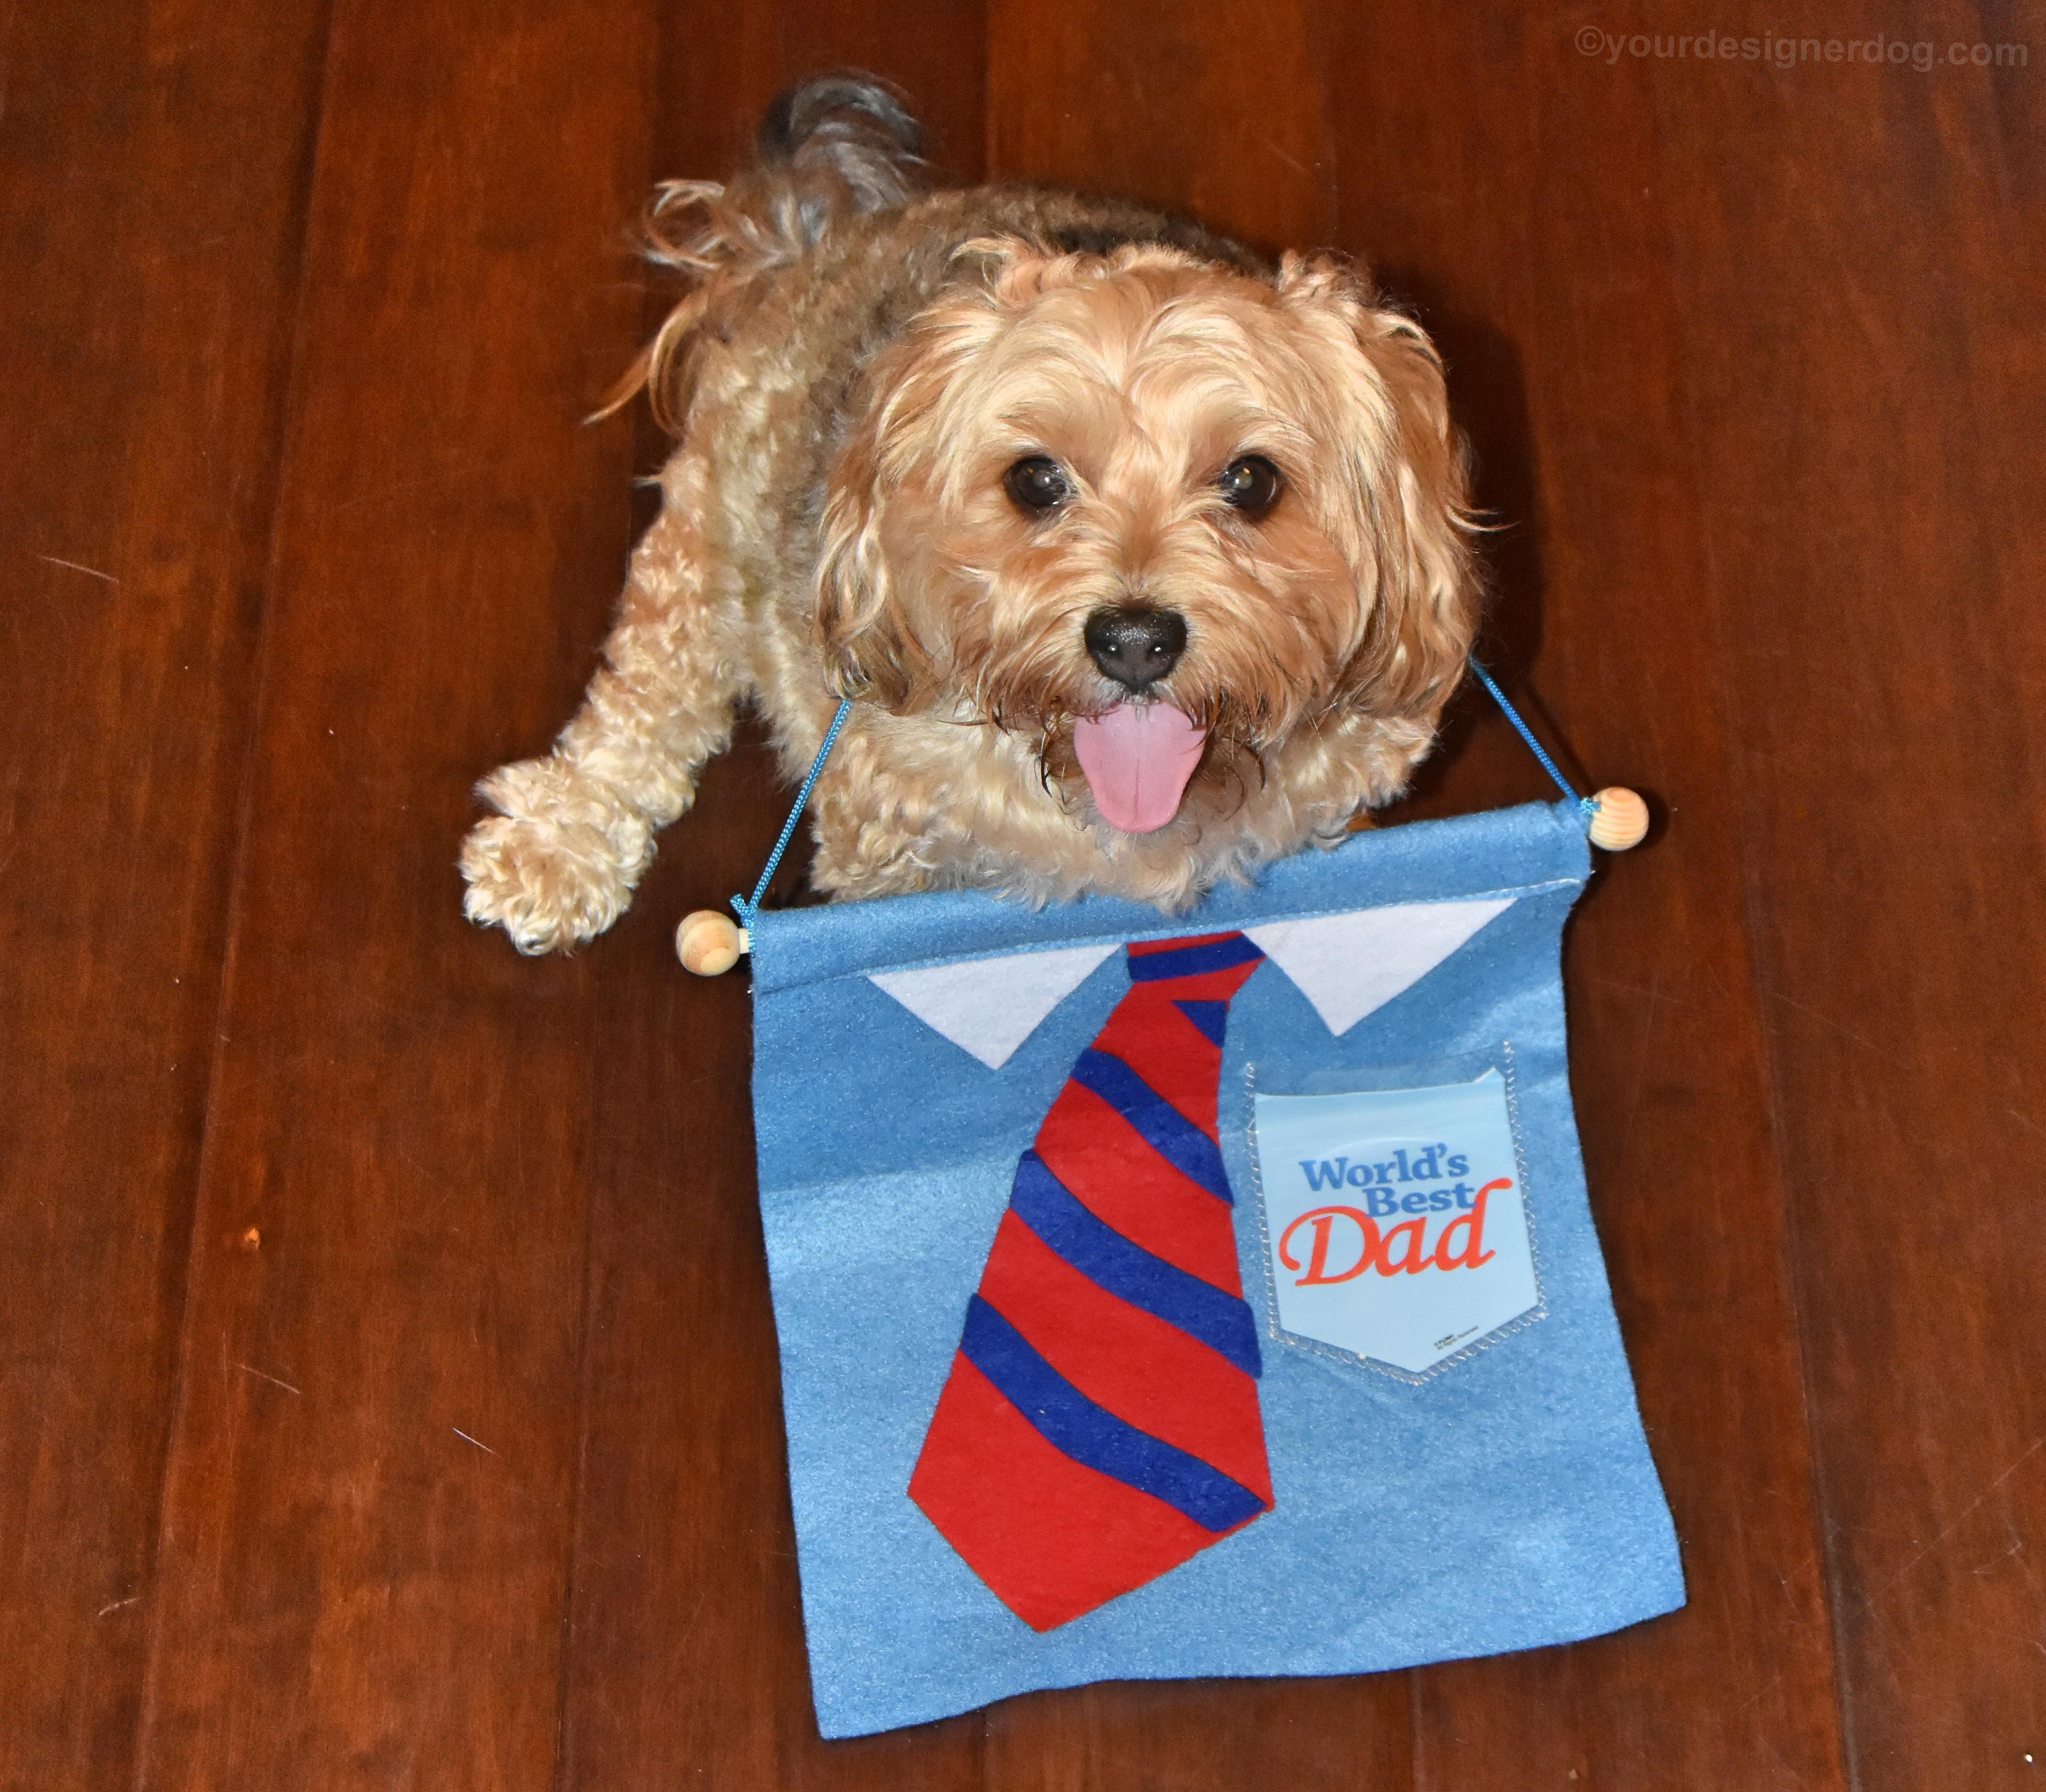 dogs, designer dogs, yorkipoo, yorkie poo, father's day, tie, tongue out